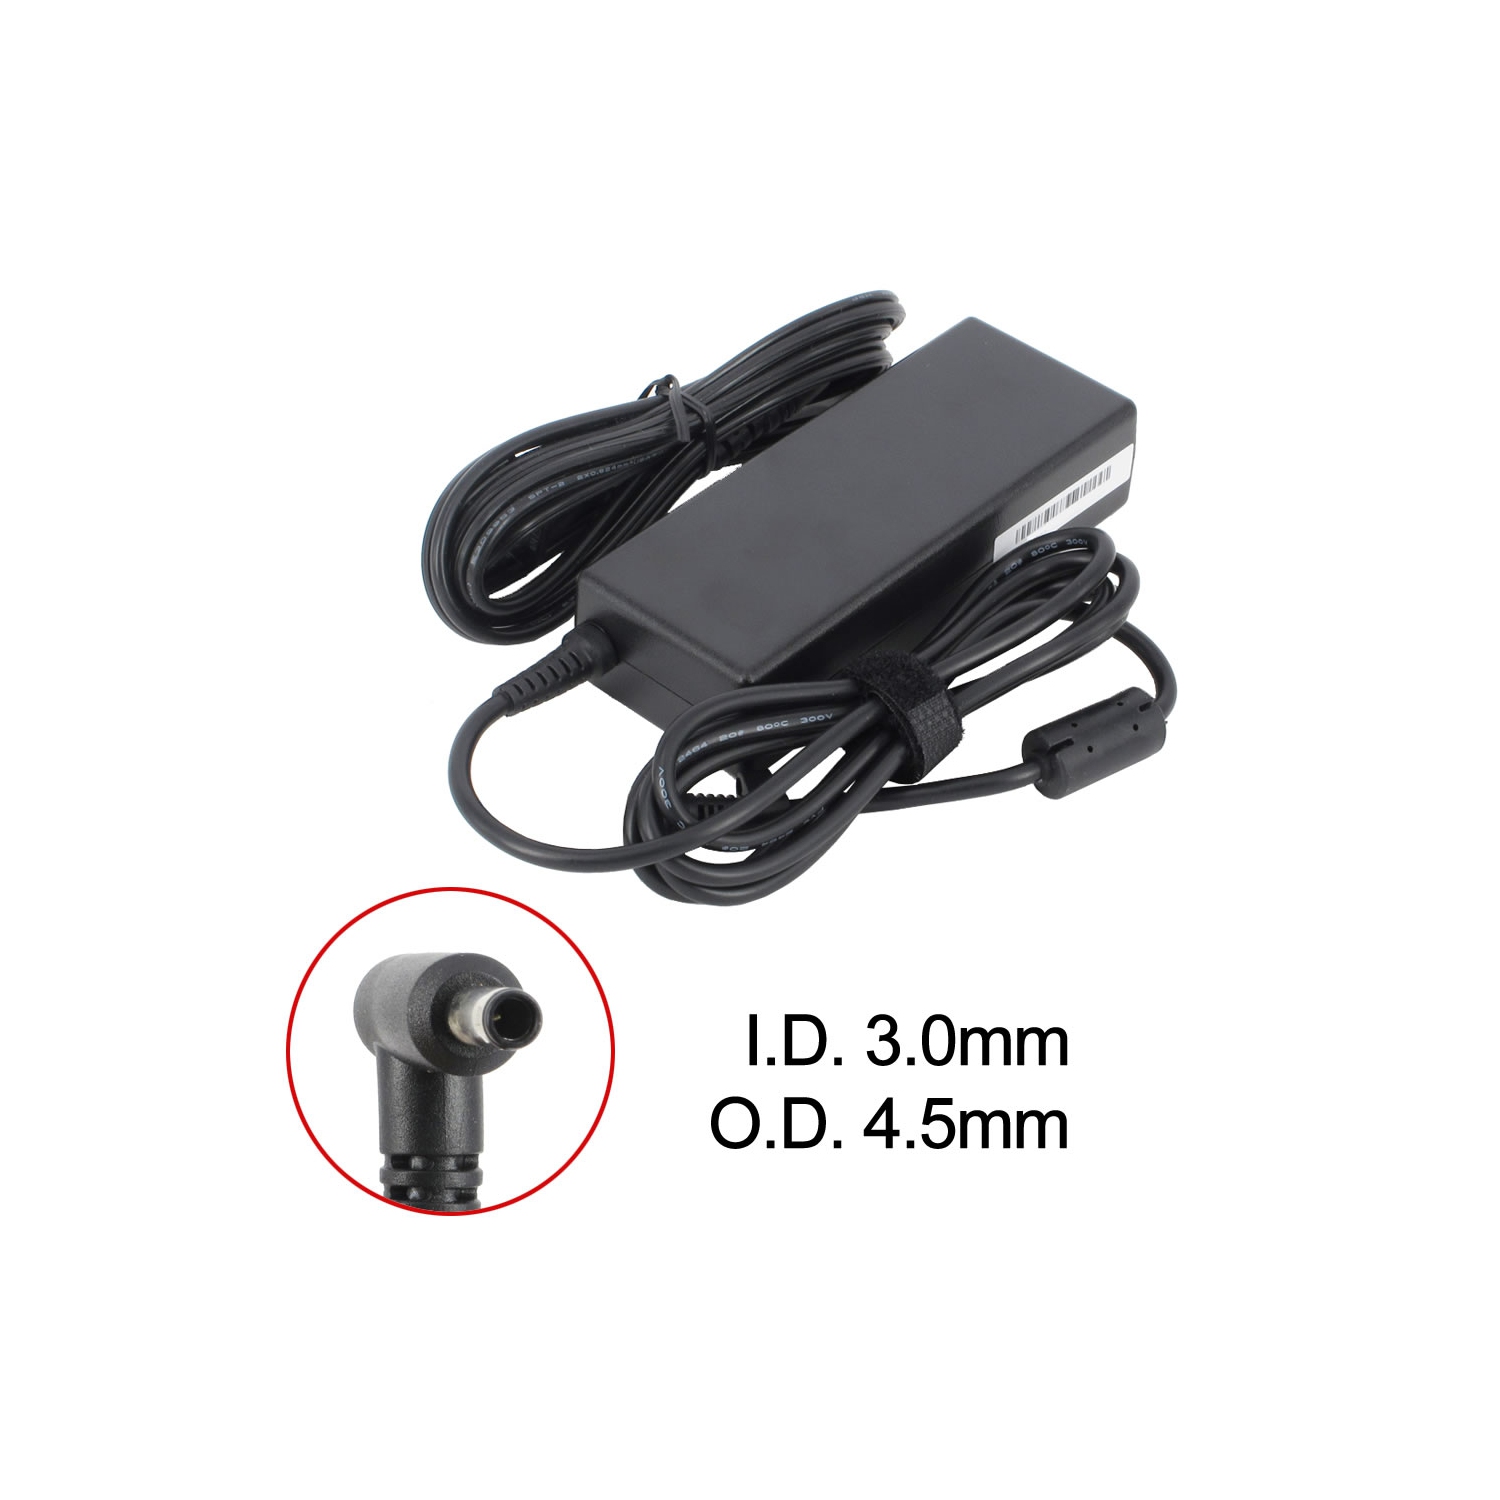 New Replacement Laptop AC Adapter for HP Pavilion x360 15-br, 714158-001, 740015-002, H6Y82AA, HSTNN-CA40, HSTNN-LA40